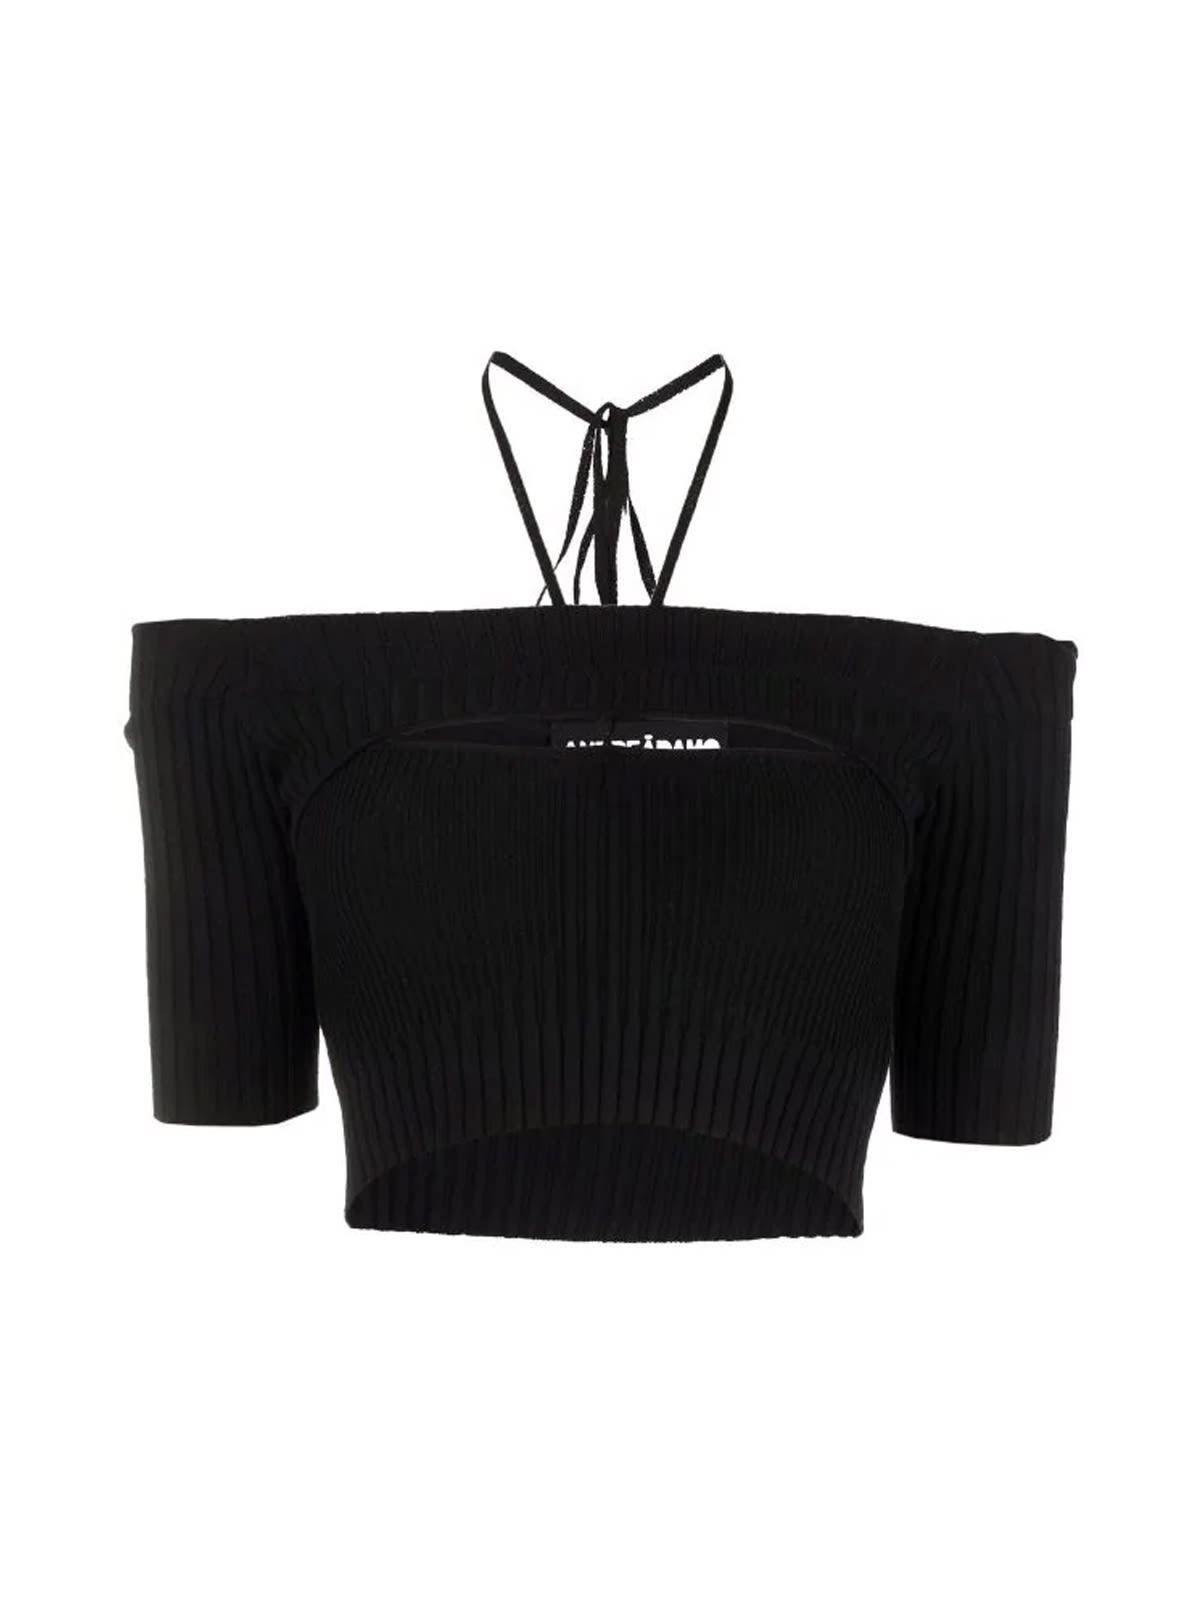 ANDREADAMO Ribbed Knit Strapless Top